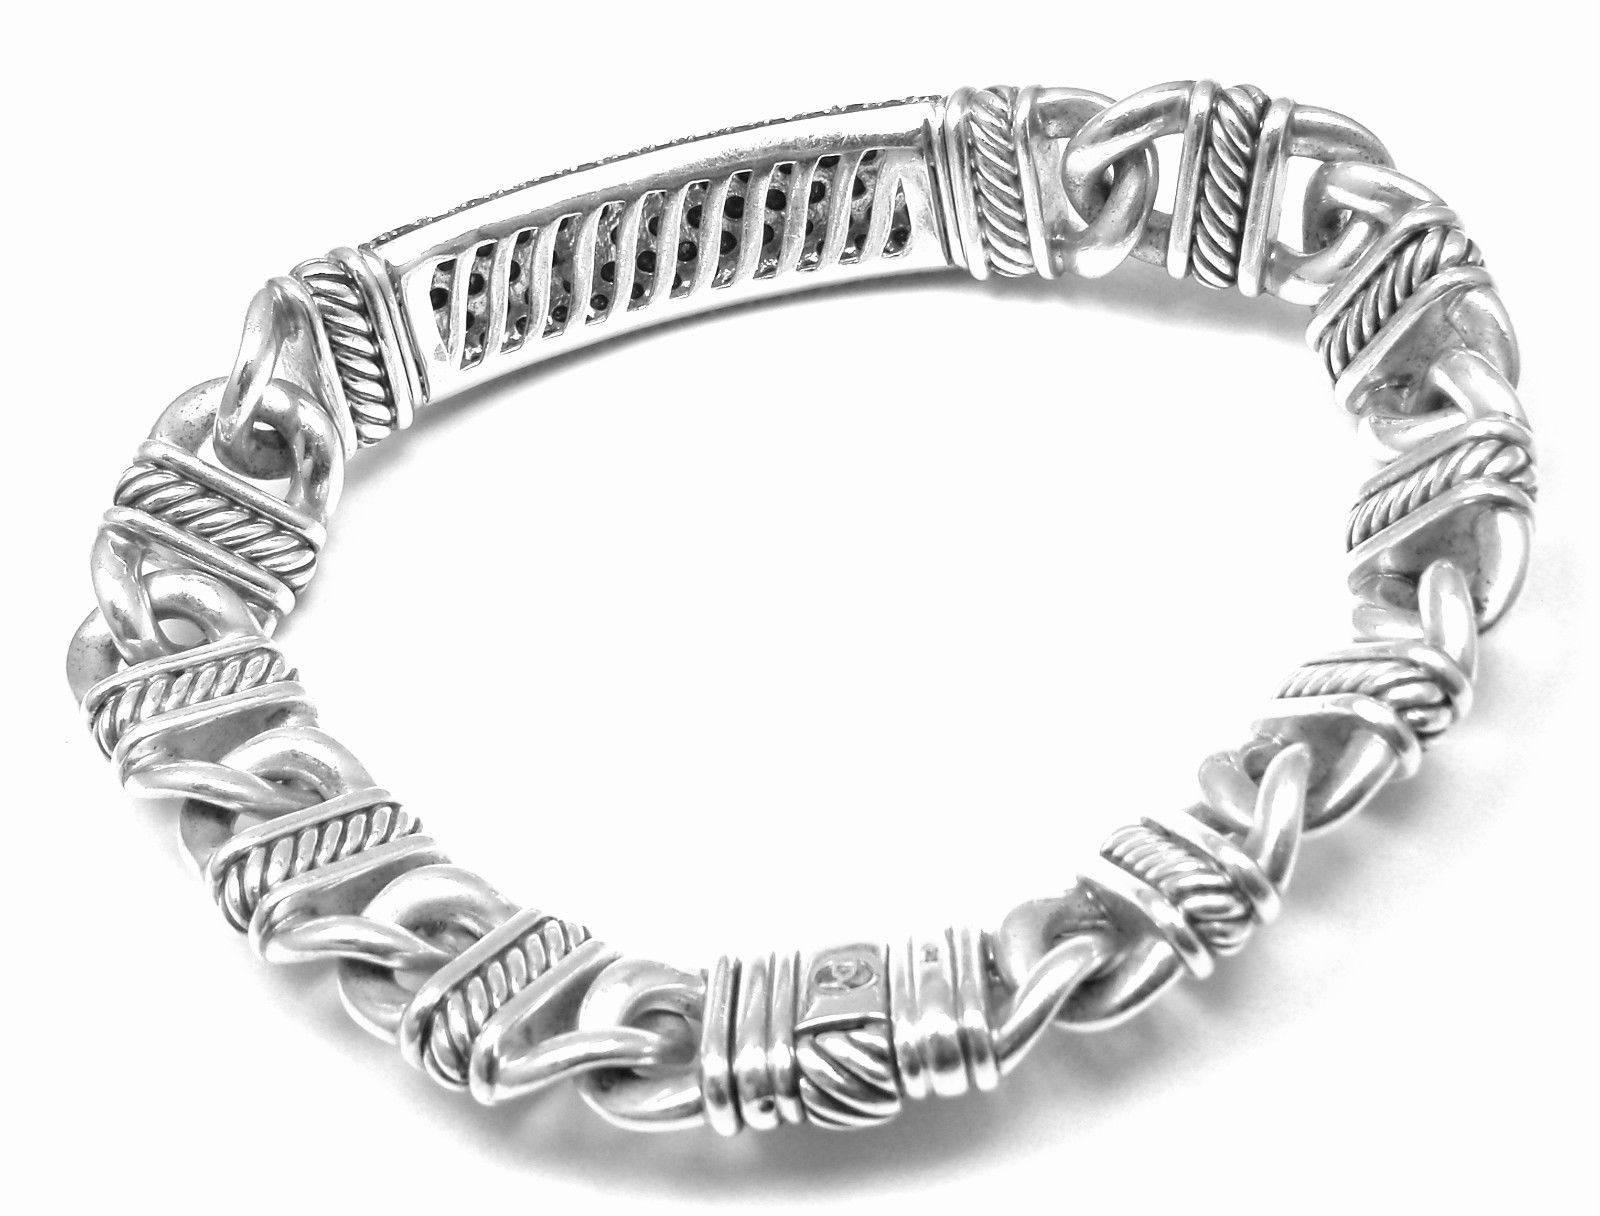 Sterling Silver Black Diamond ID Link Bracelet by David Yurman from Estate of Jackie Collins.
This bracelet used to belong to Jackie Collins and was purchased from her jewelry estate collection.
With Round white diamonds total weight approx.